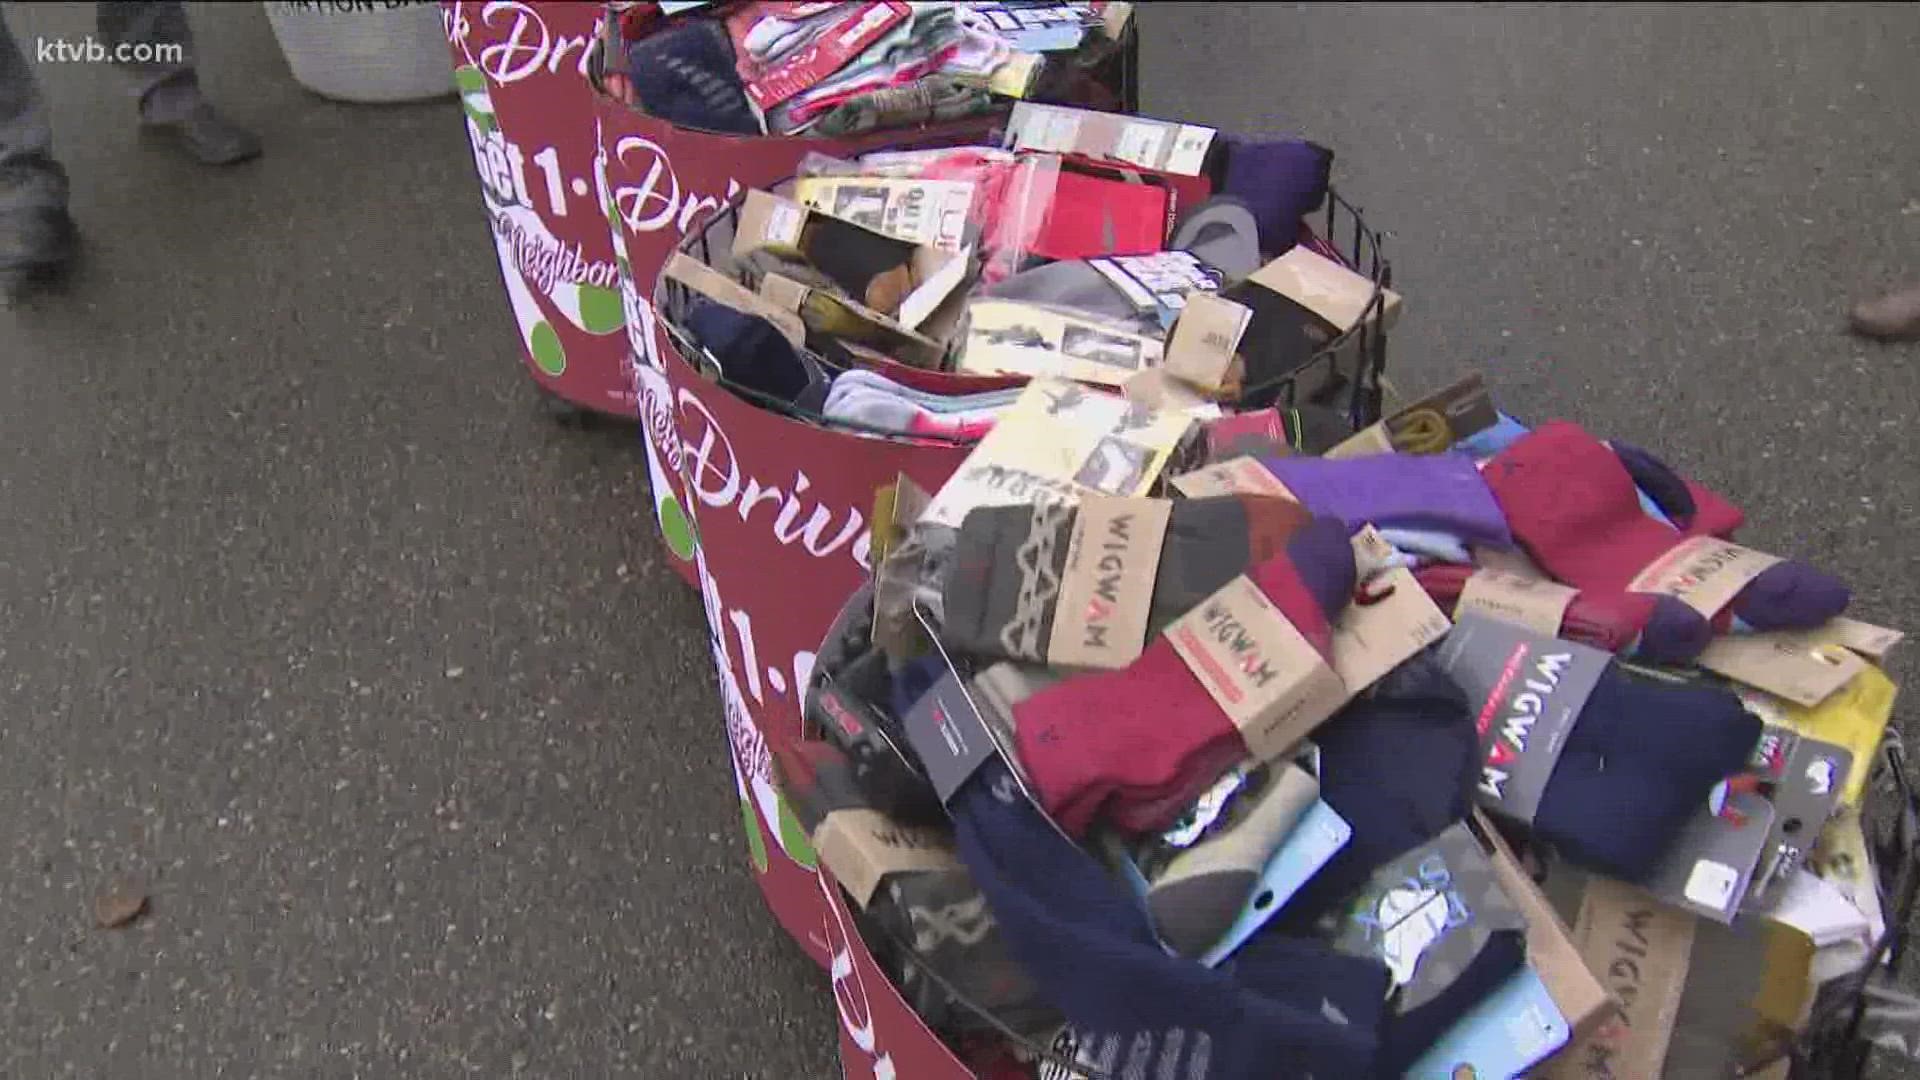 McU Sports and Mix106 teamed up with Rescue Mission to donate more than 2000 pairs of socks to people experiencing homelessness